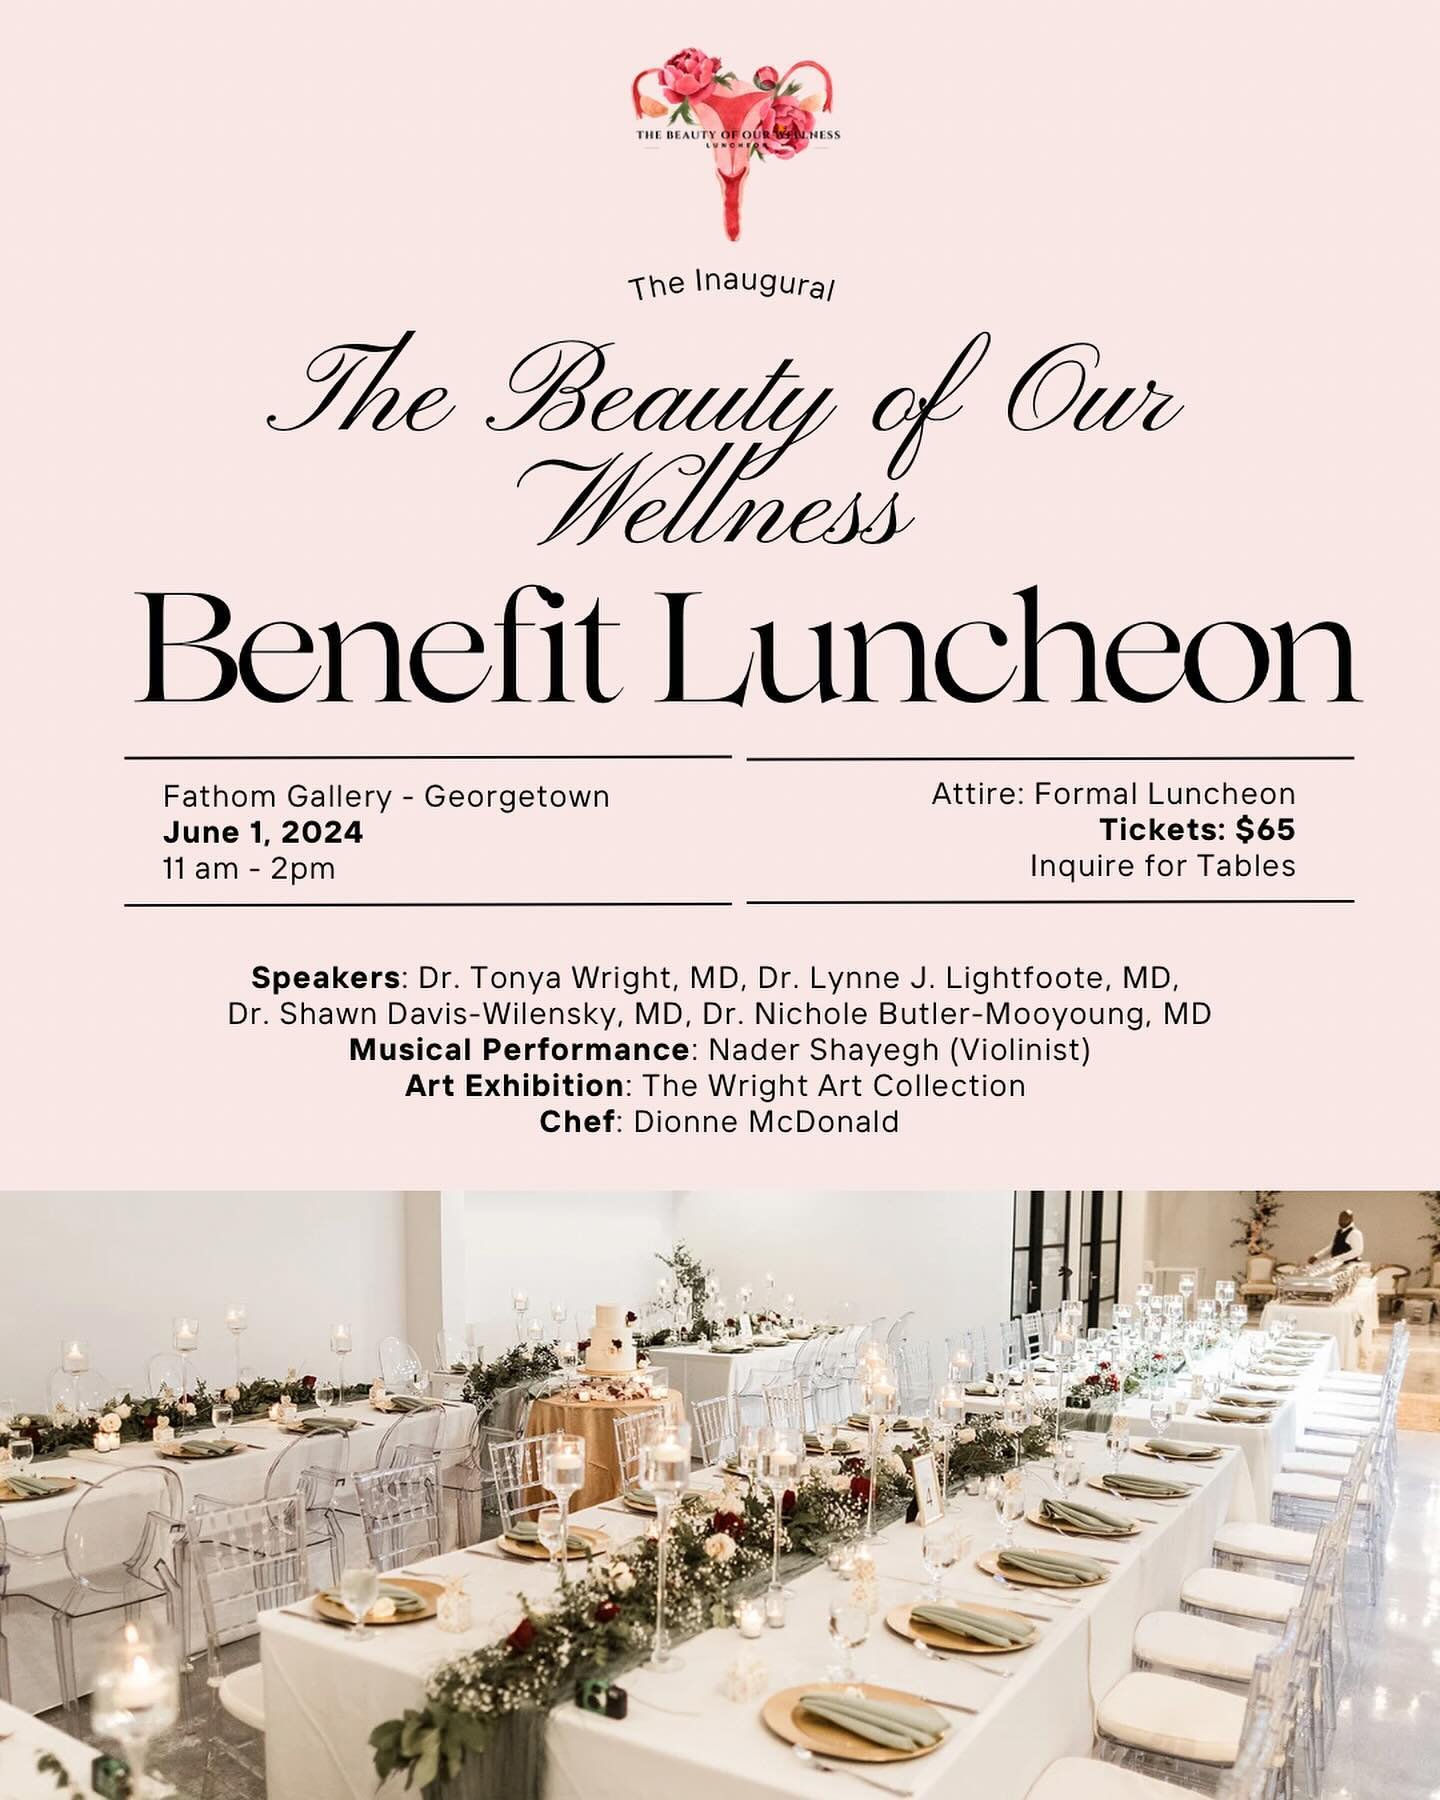 🌸 The ladies of The Beauty of Our Wellness are excited to announce the inaugural The Beauty of Our Wellness Benefit Luncheon! 🌸

With a phenomenal speaker line up of renowned OBGYNs, an fine art exhibit featuring selected works from @thewrightartco